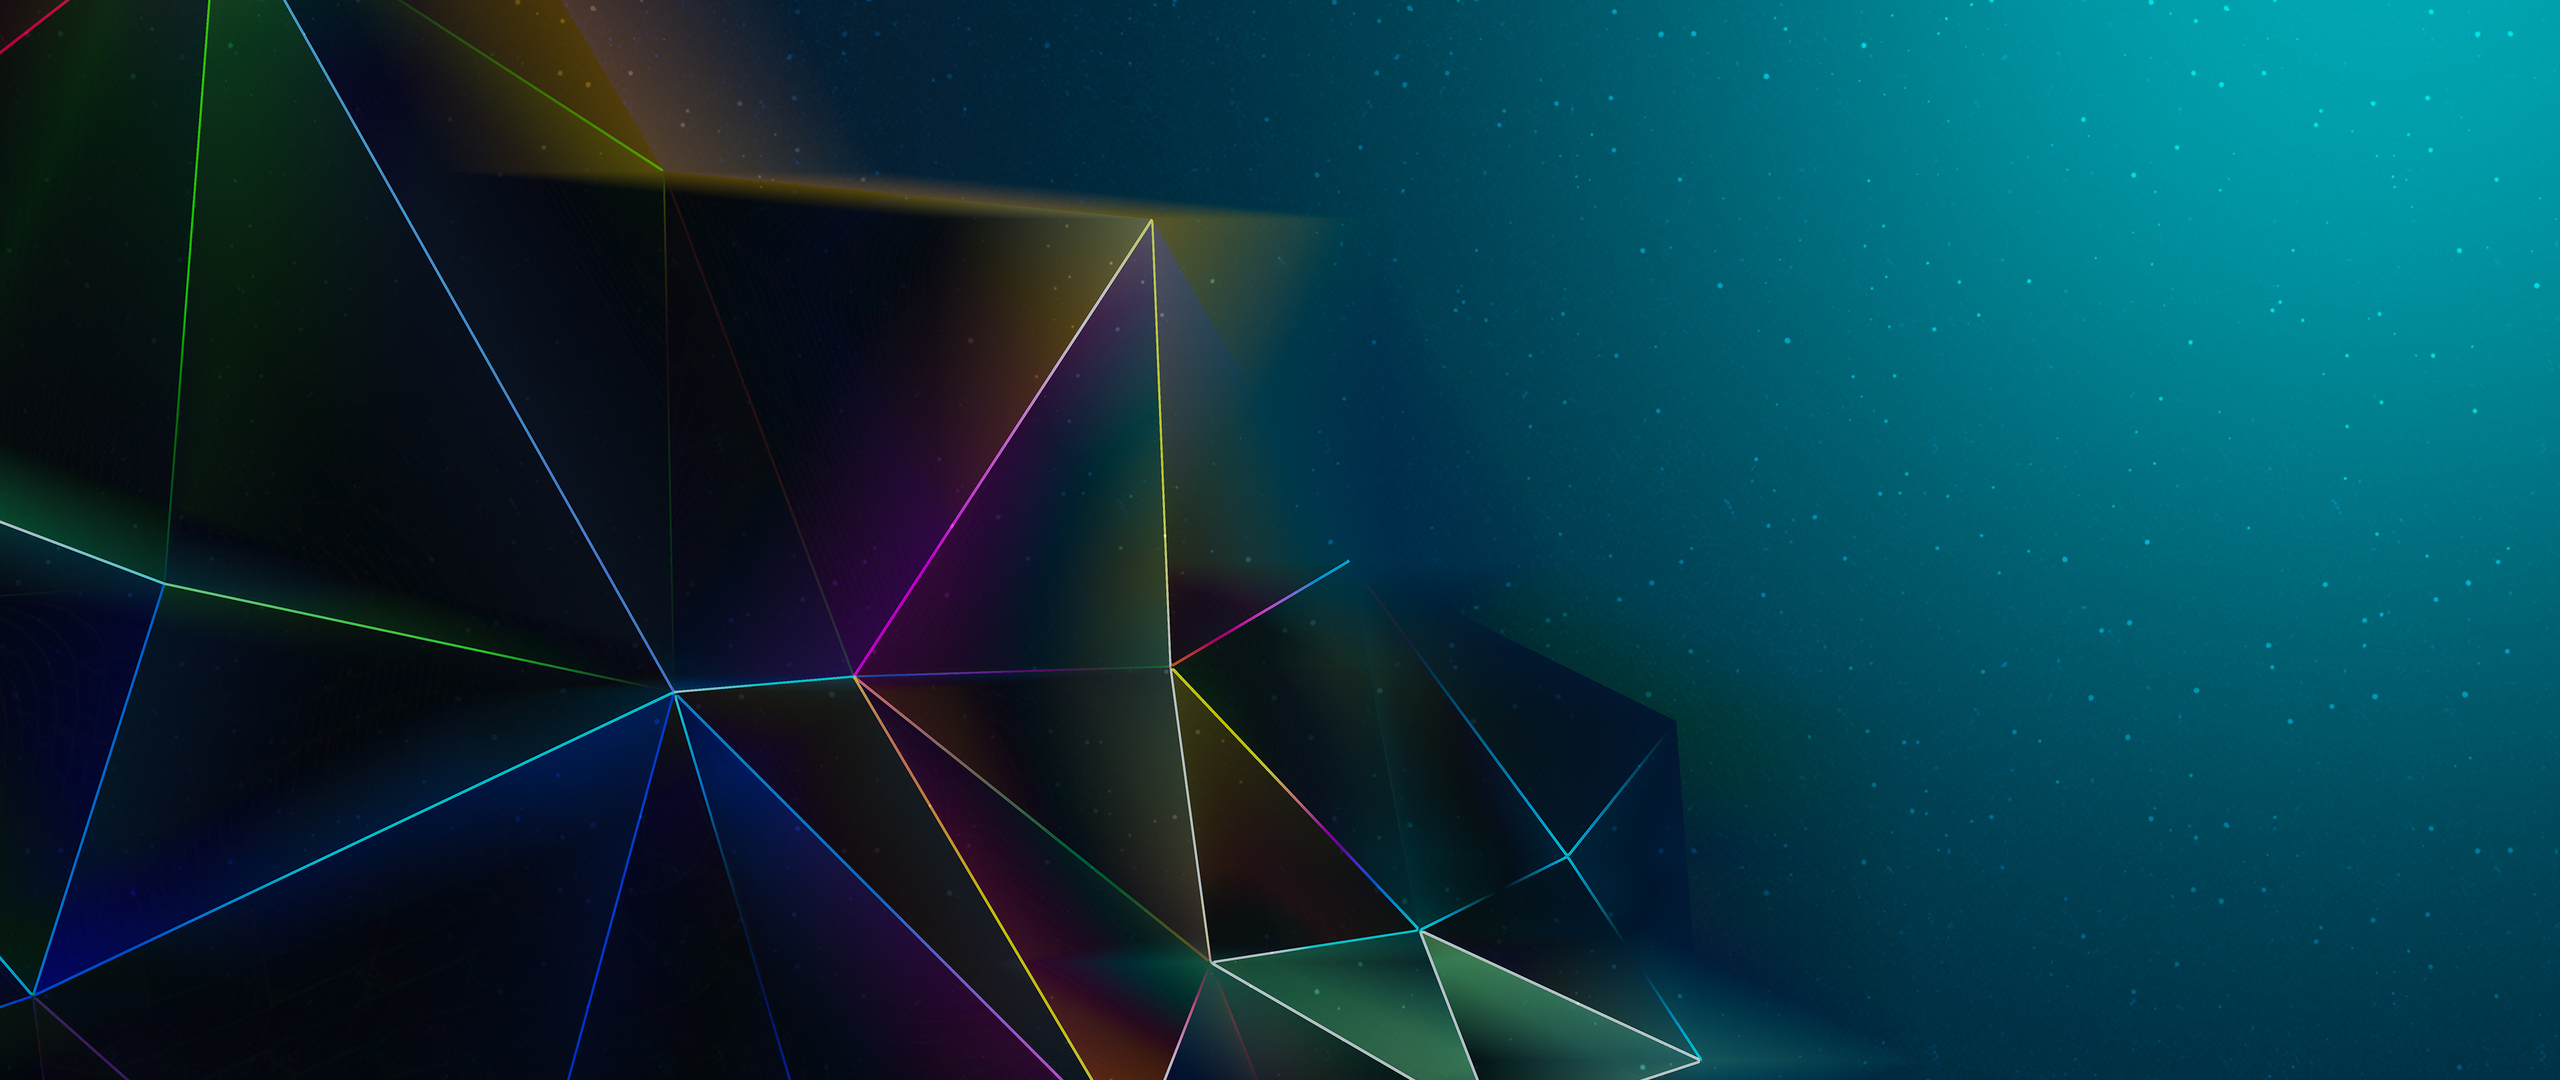 abstract-triangles-motion-4k-wq-2560x1080.jpg